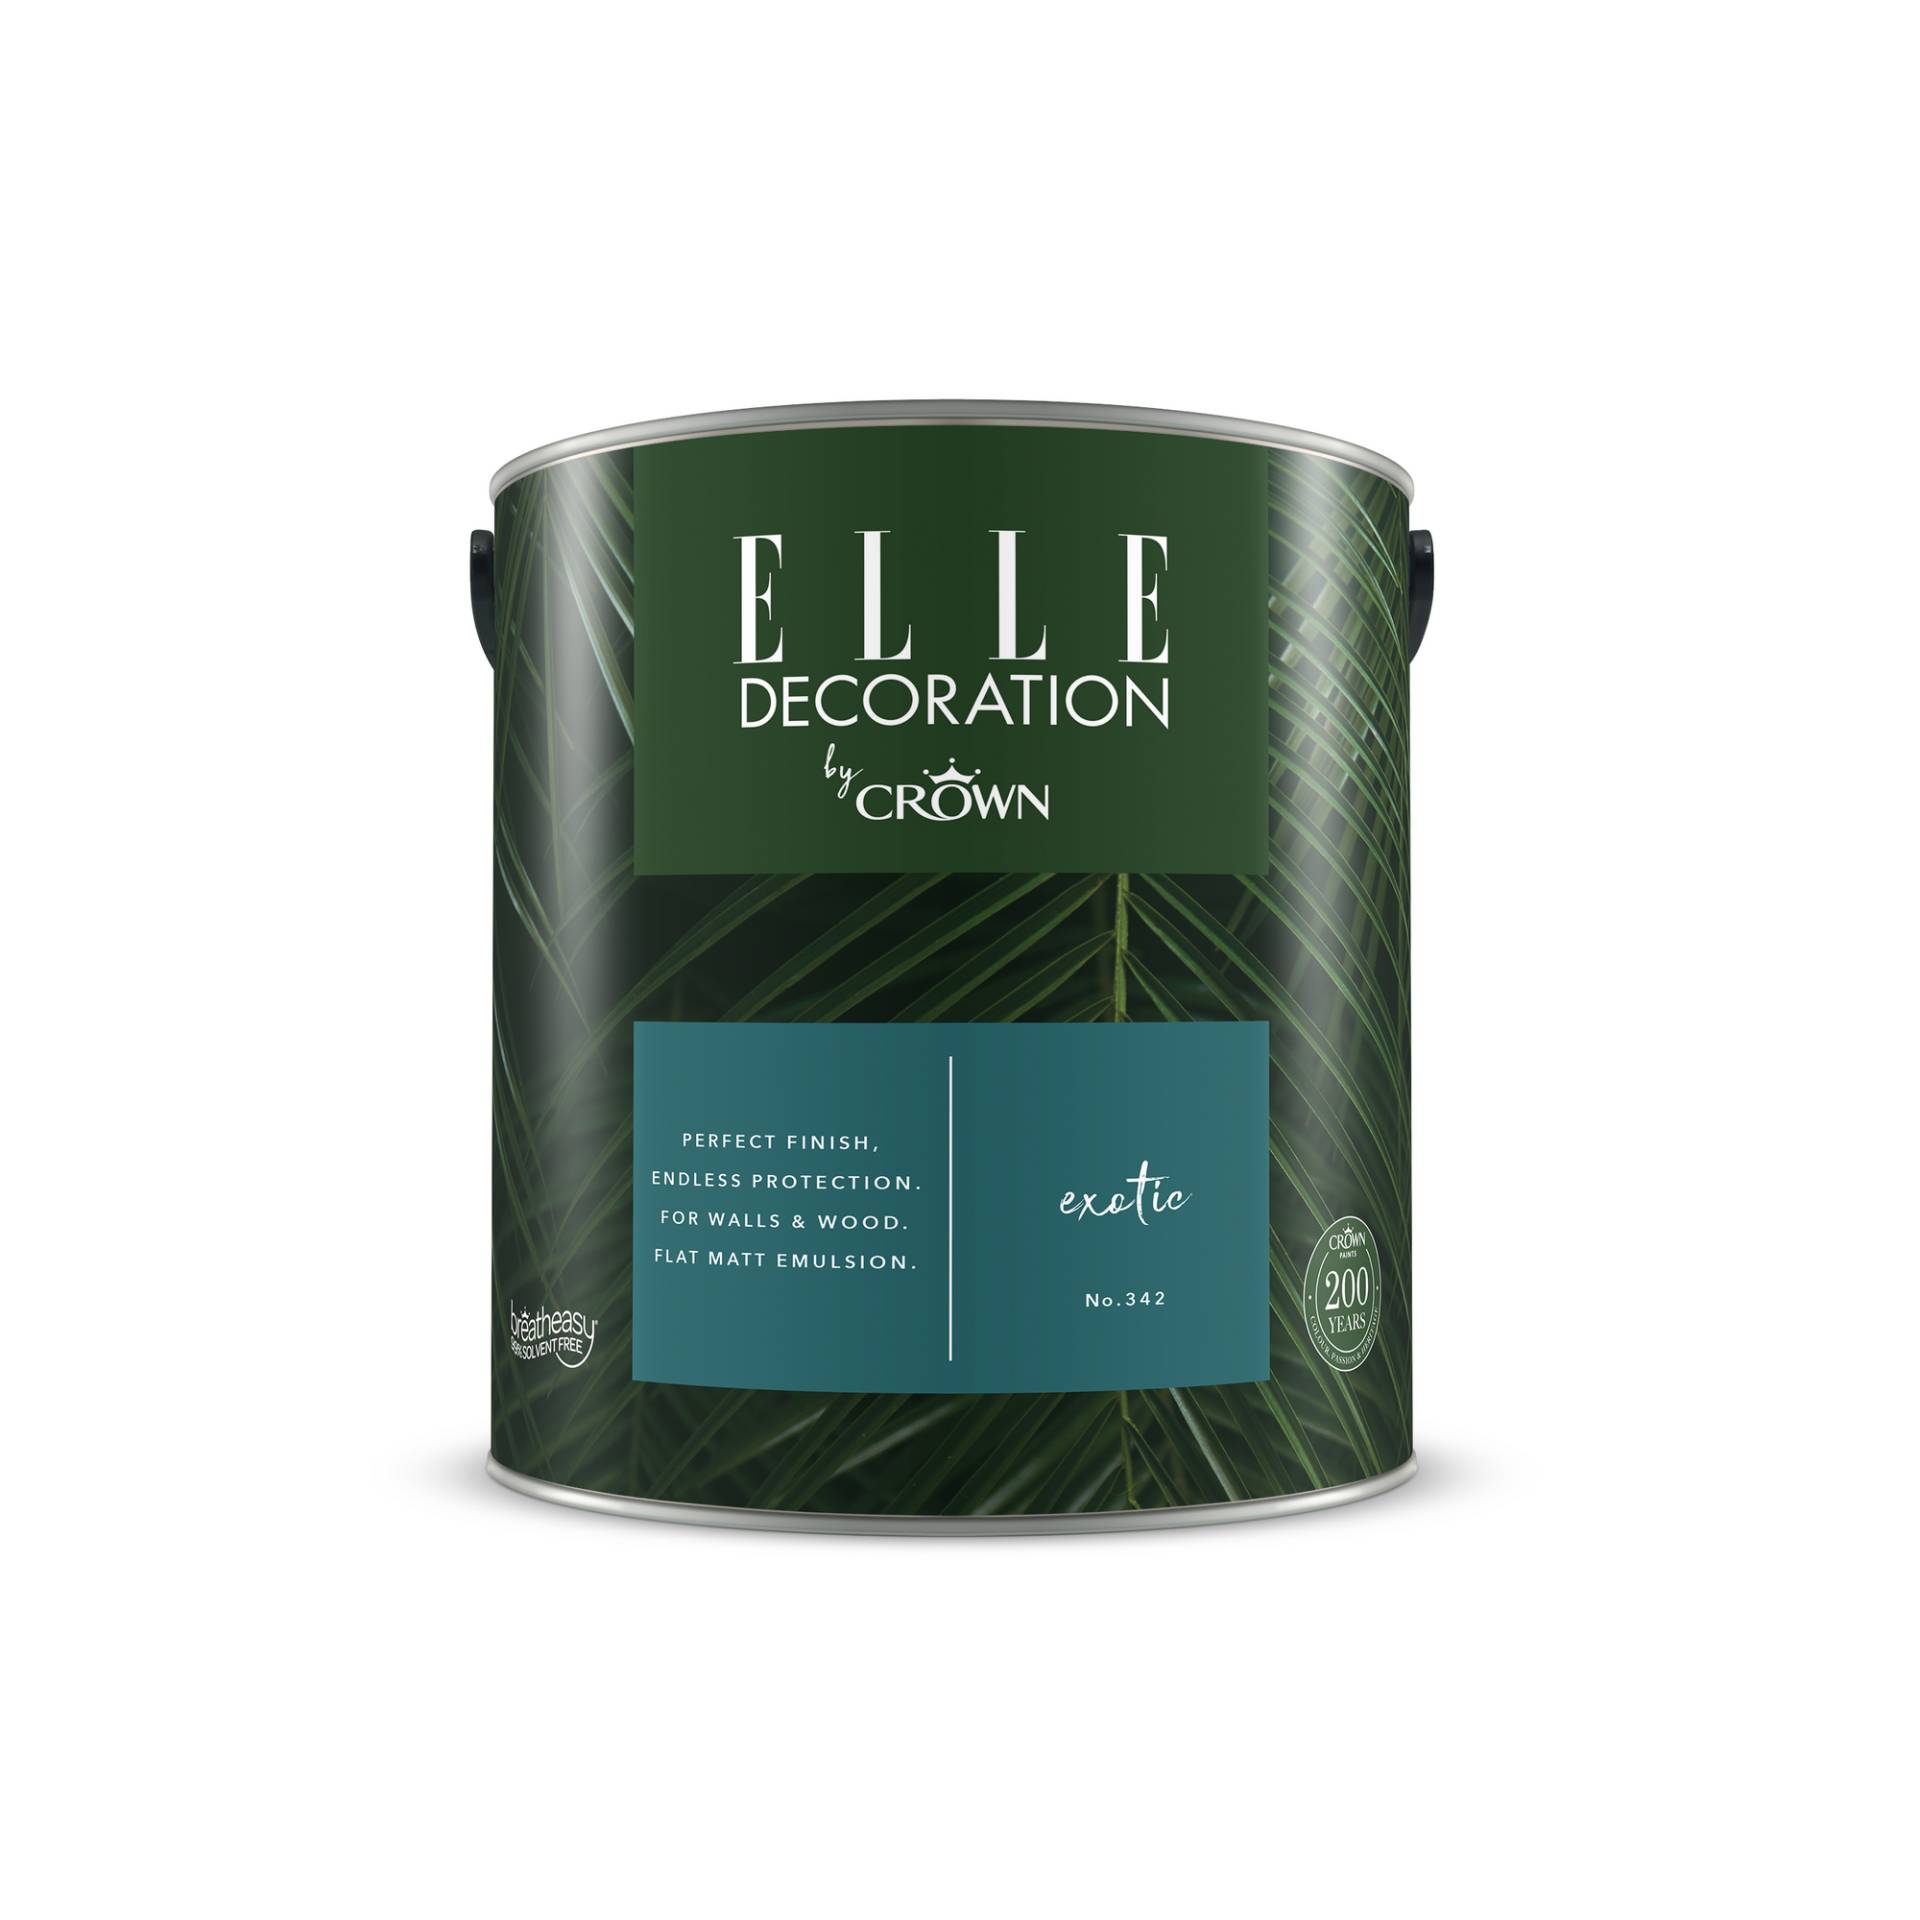 ELLE Decoration by Crown Wandfarbe 'Exotic No. 342' petrol matt 2,5 l von ELLE Decoration by Crown